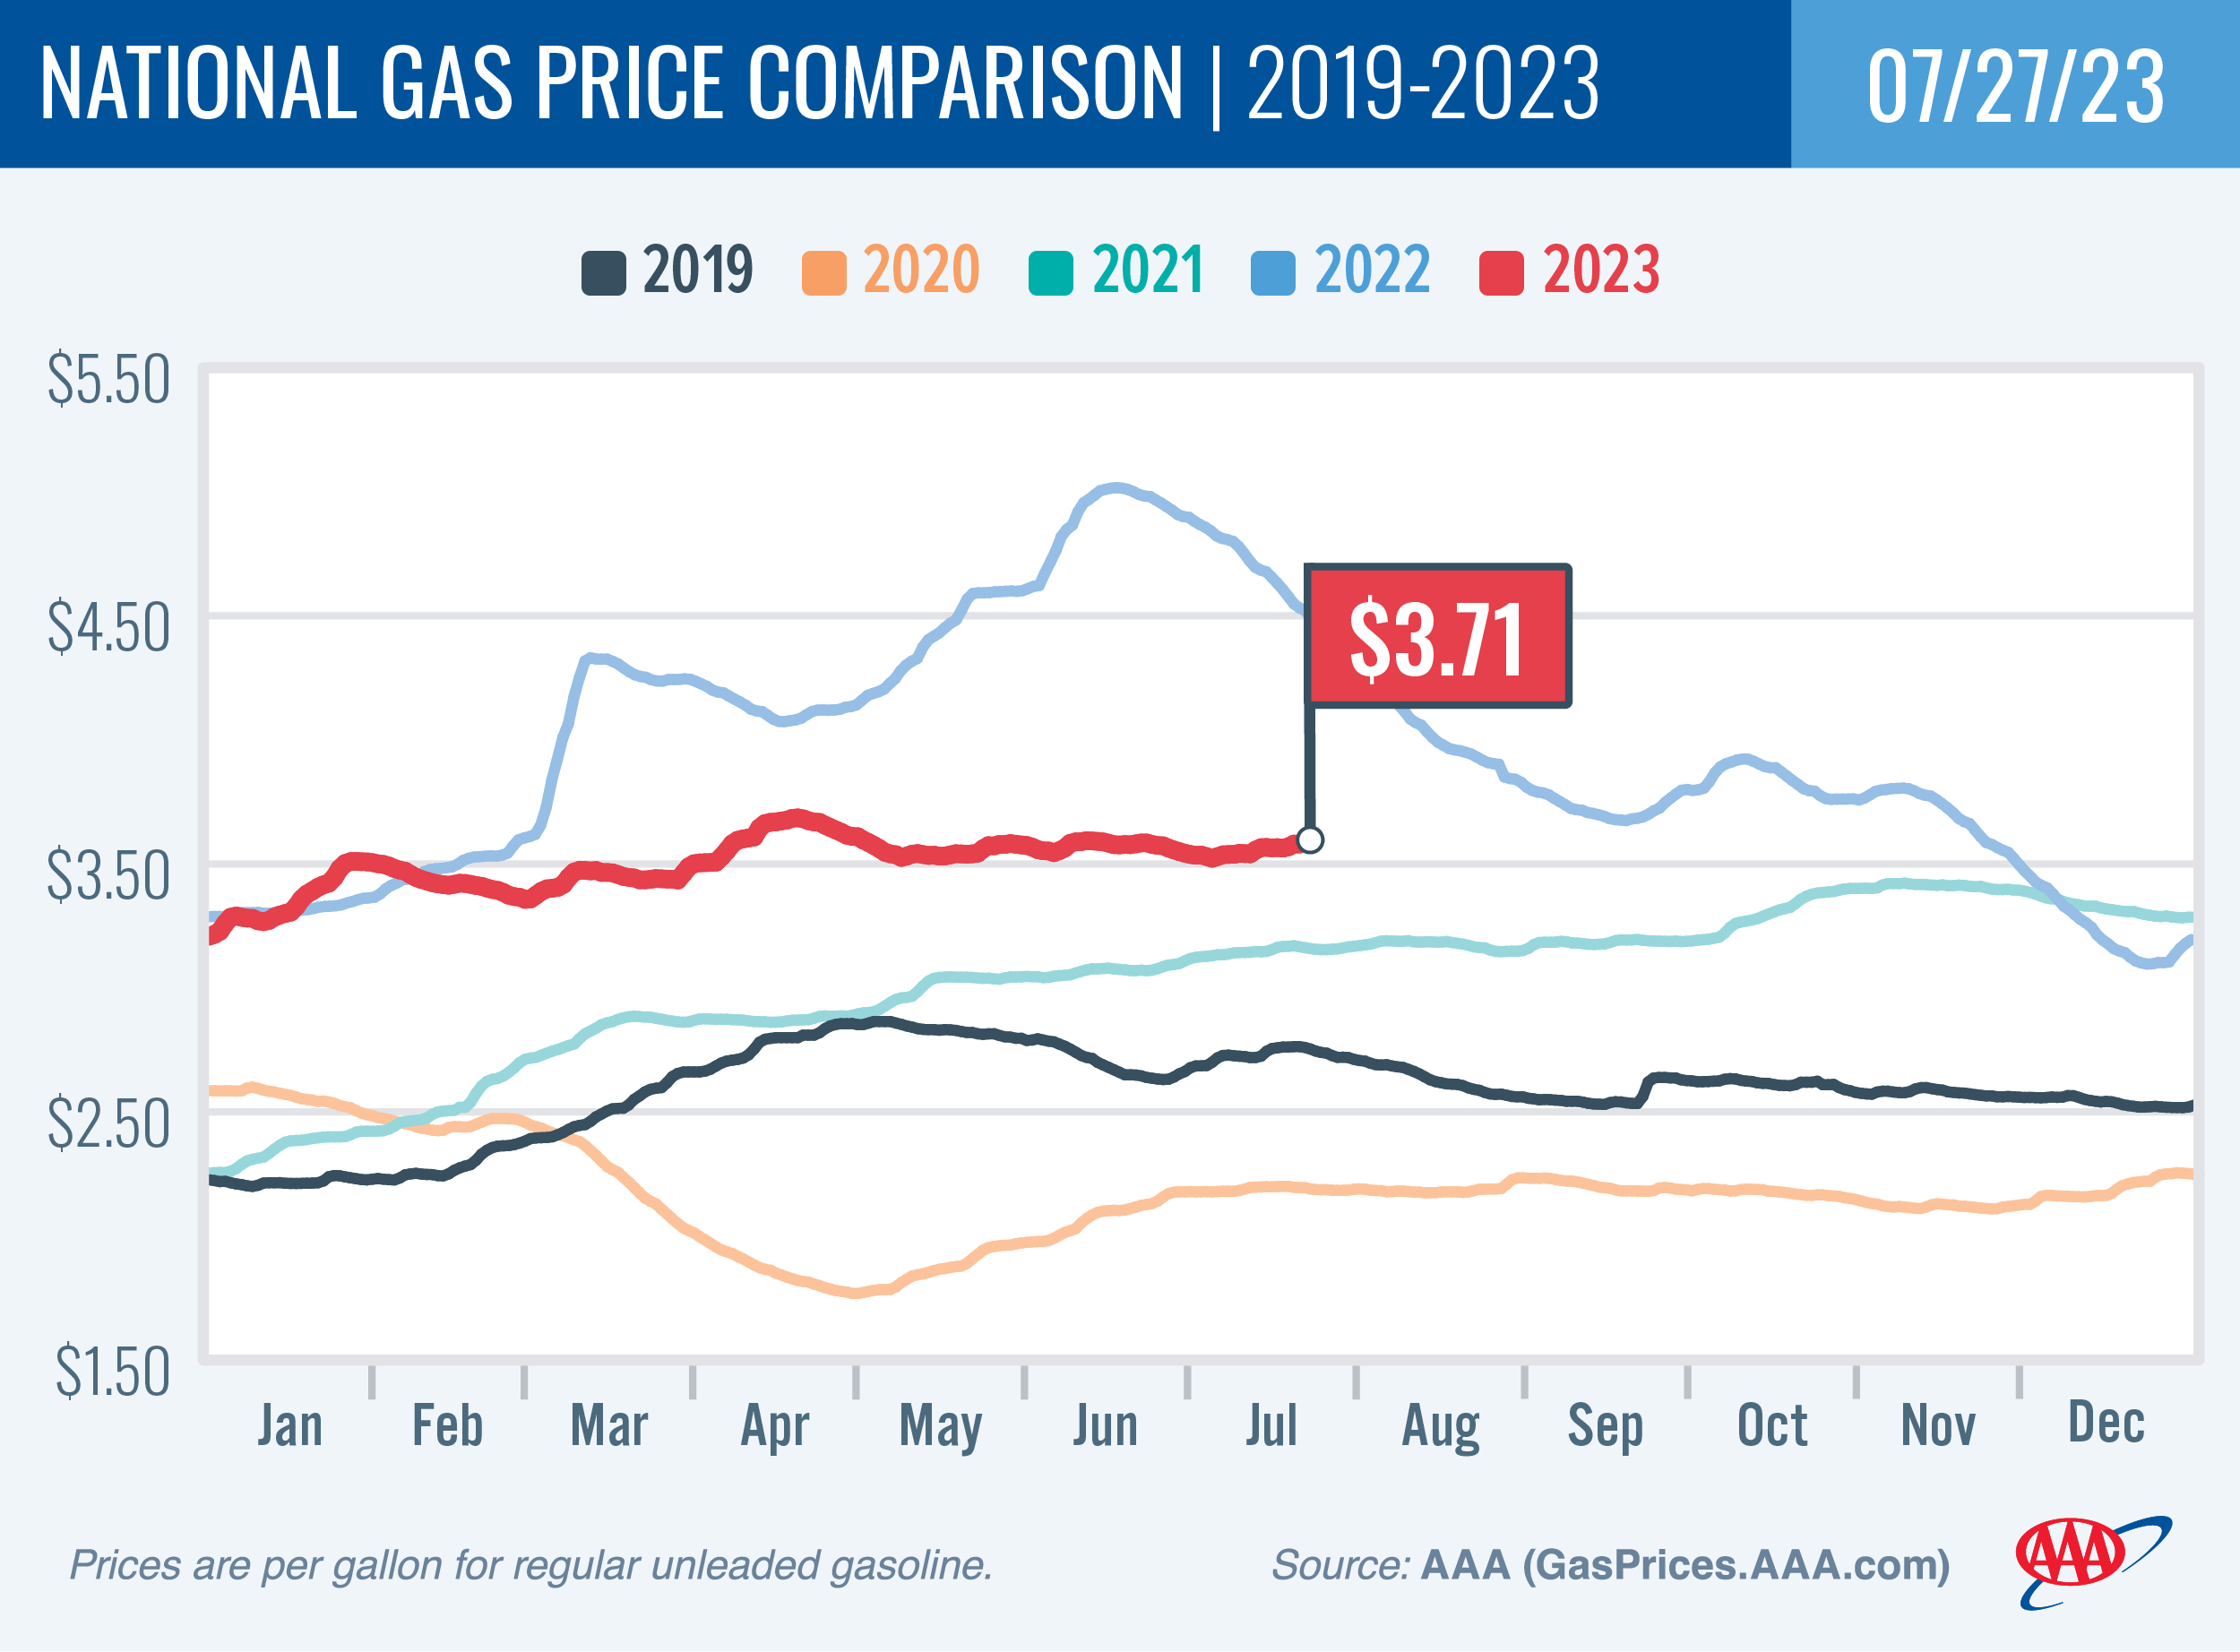 National Gas Price Comparison for July 27, 2023